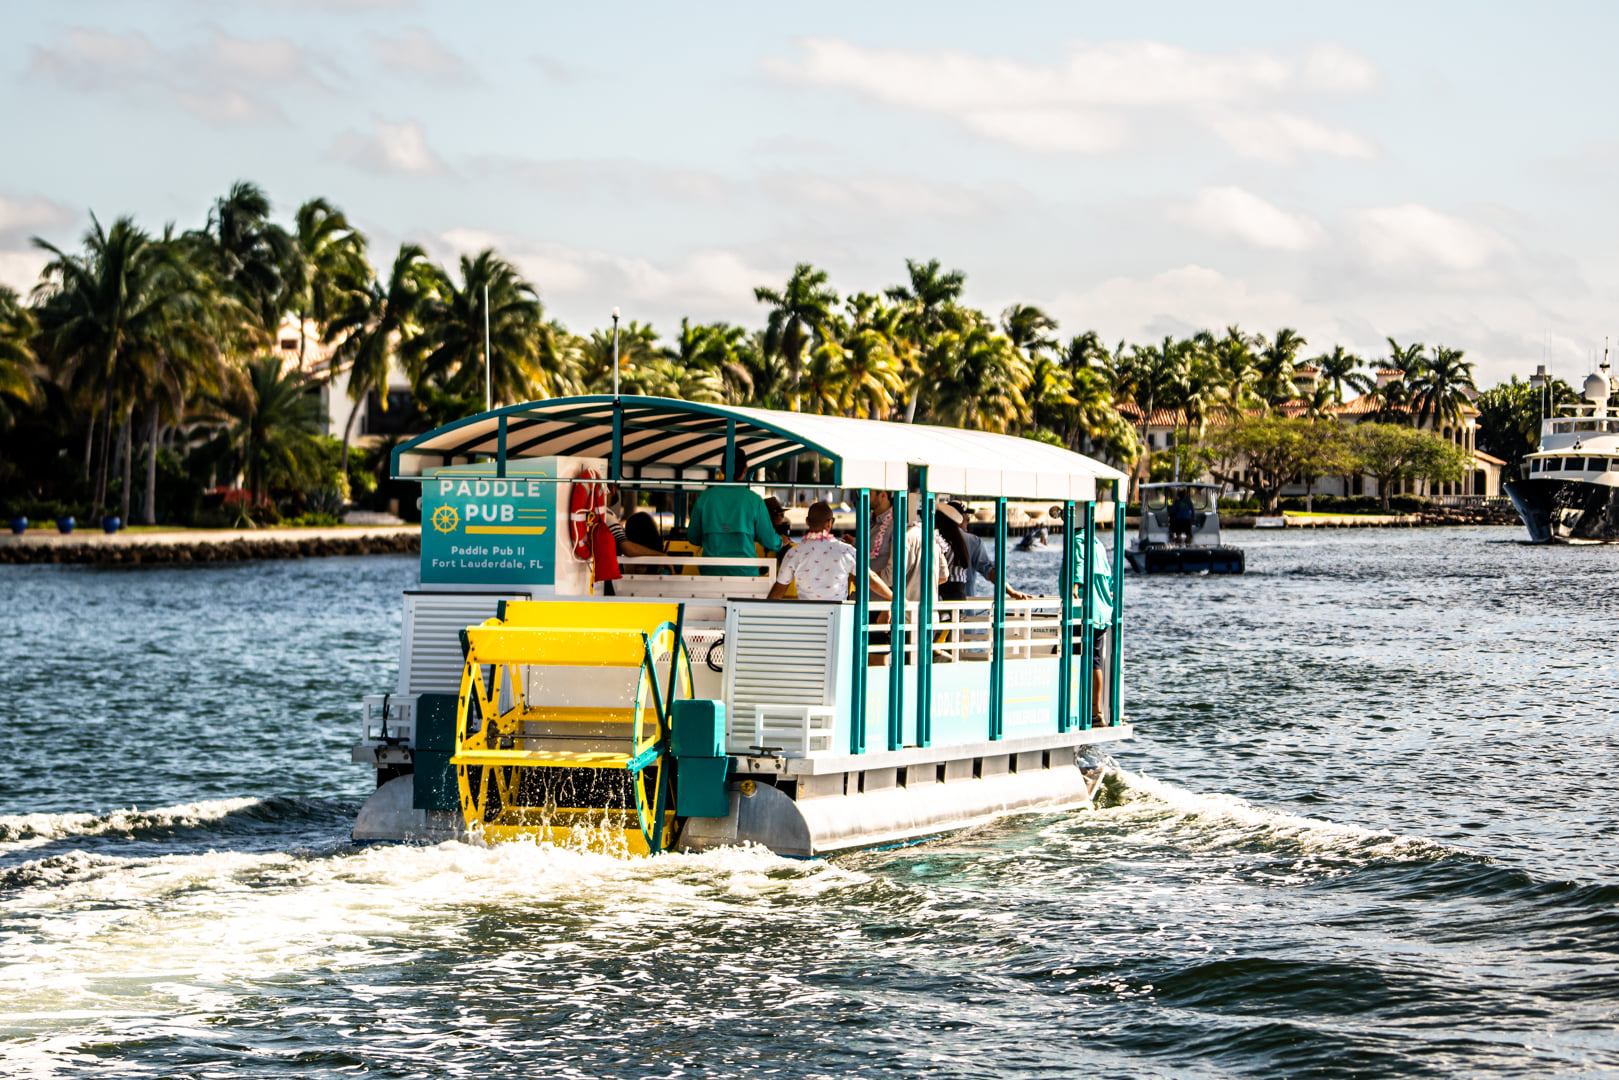 Private Party on a Cycle Boat in Fort Lauderdale